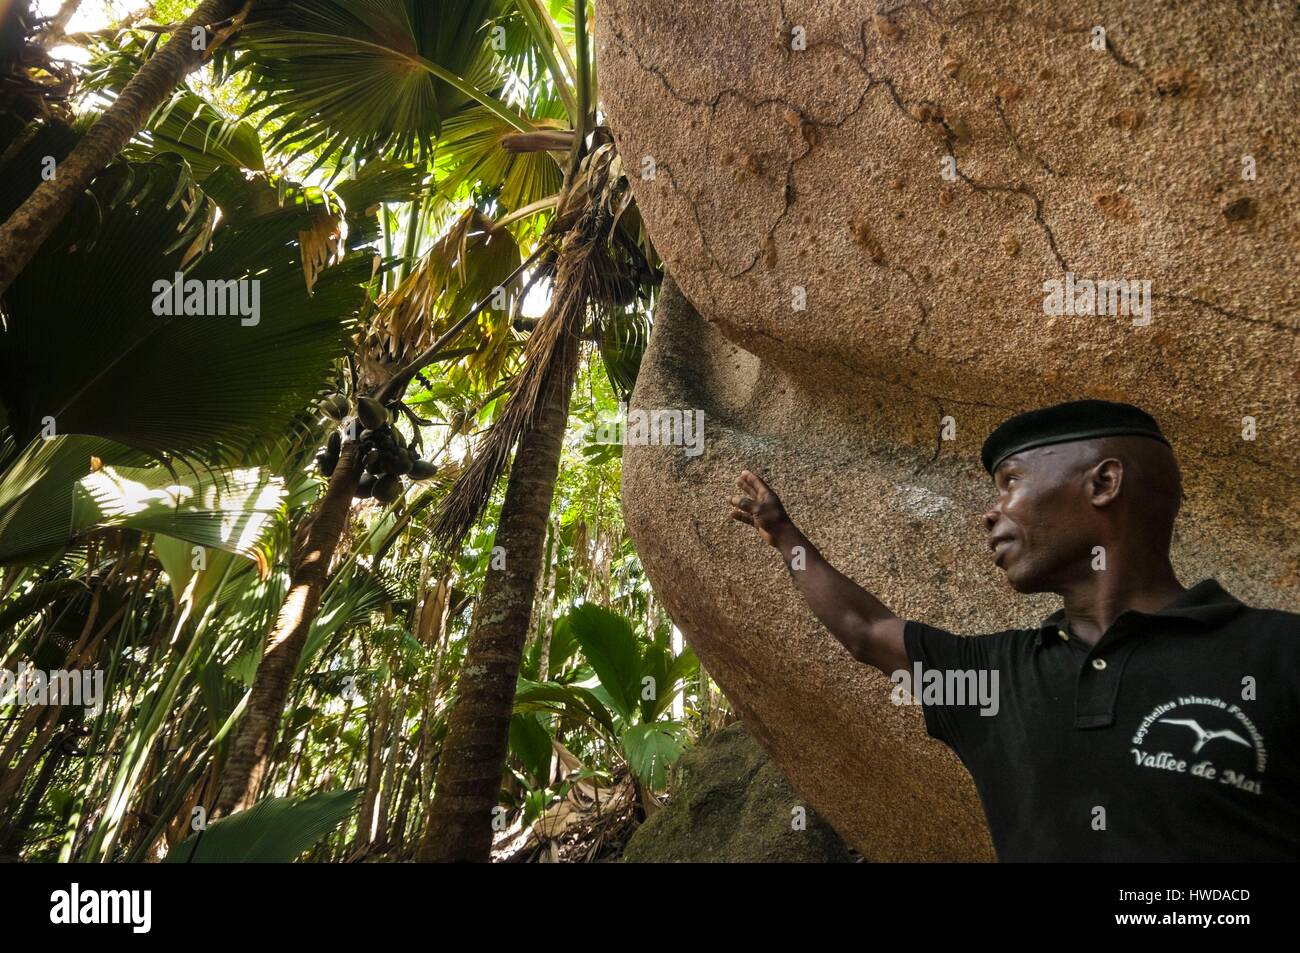 Seychelles,Praslin Island,Vallée de Mai National Park,Unesco World Heritage,the ranger Andrea RADEGONDE patrols every day,several times a day,looking for endemic coco de mer (Lodoicea maldivica) fallen on the ground,he hides them under a giant coco de mer dry palm until the field workers bring them back to the office of the Seychelles Islands Foundation (SIF) during their collects,every monday morning,Andrea is there to fight against poaching and coco de mer theft (prized for their flesh which 1kg dry can be sold for US$ 30 on the Asian market Stock Photo